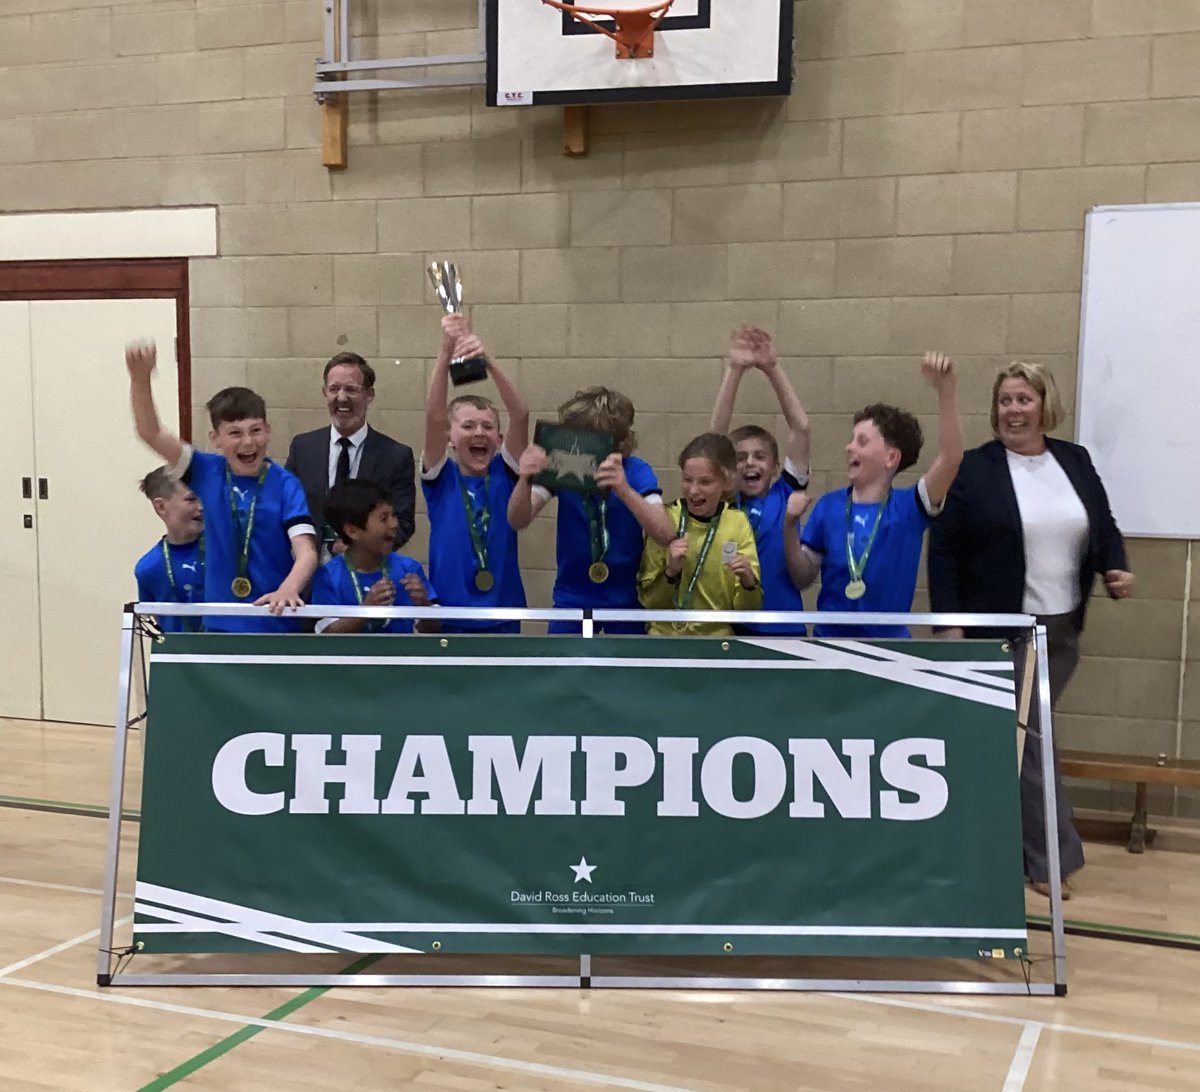 And on the football pitches… Congratulations to the Football Champions @WoldAcademy 🥇, 2nd place @QuayAcademy 🥈and 3rd @CedarRoadPri 🥉 . Well done to all, it was a brilliant day of sport, and played to a very high standard! #championsday